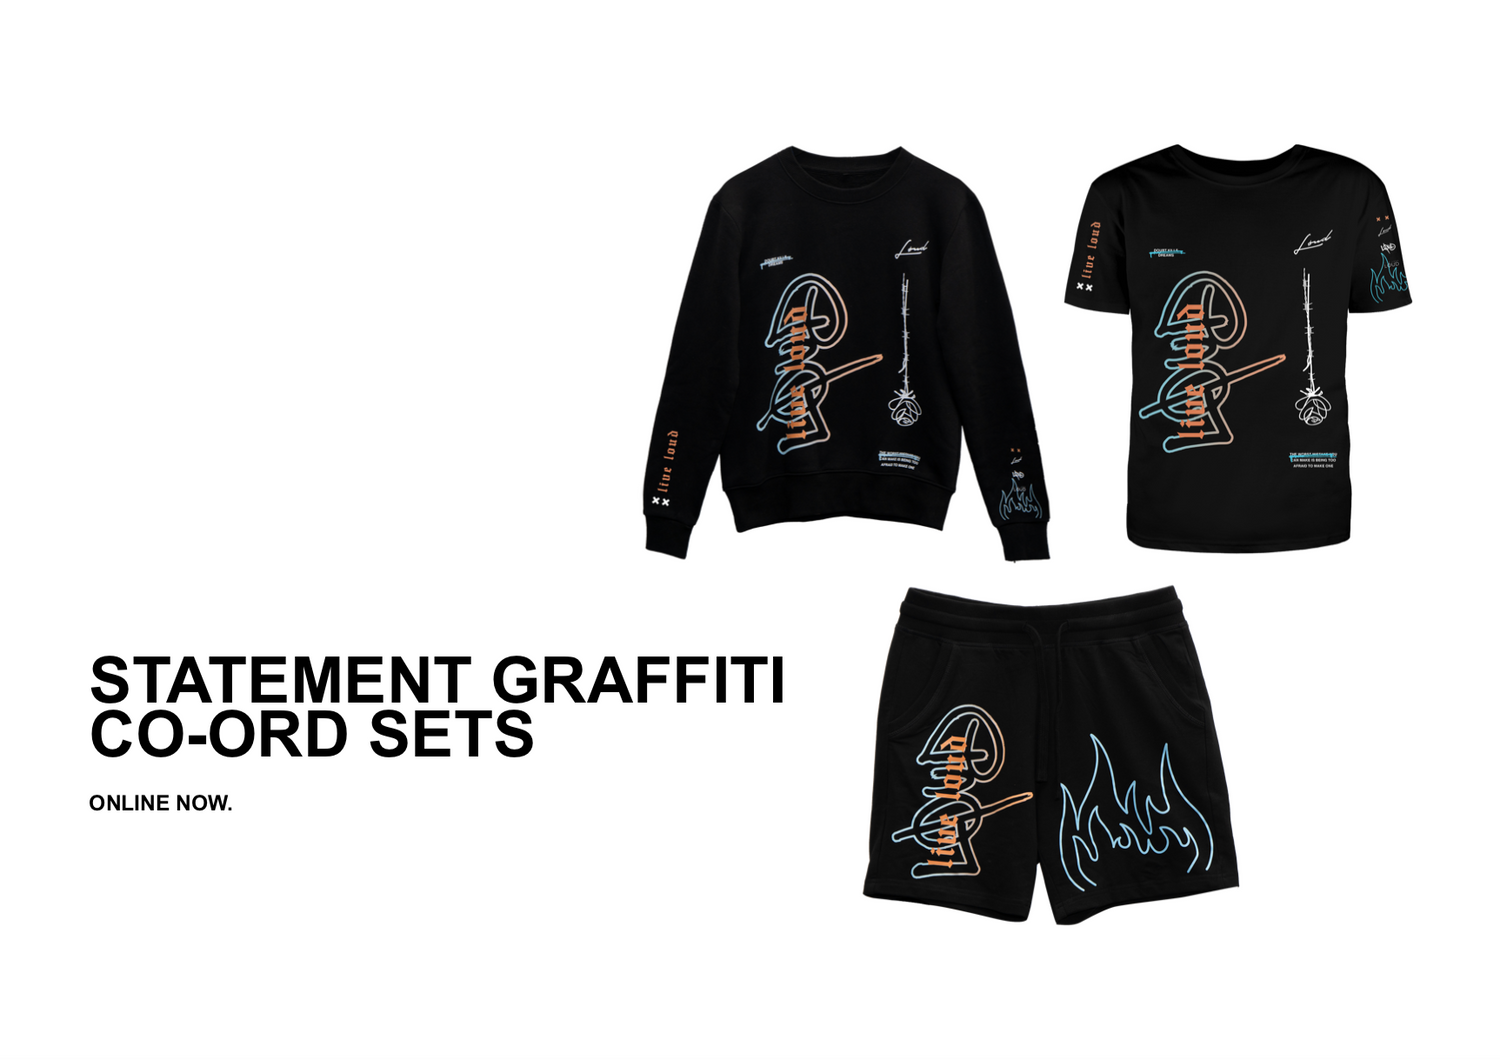 LOUD STATEMENT GRAFFITI CO-ORD SETS - ONLINE NOW